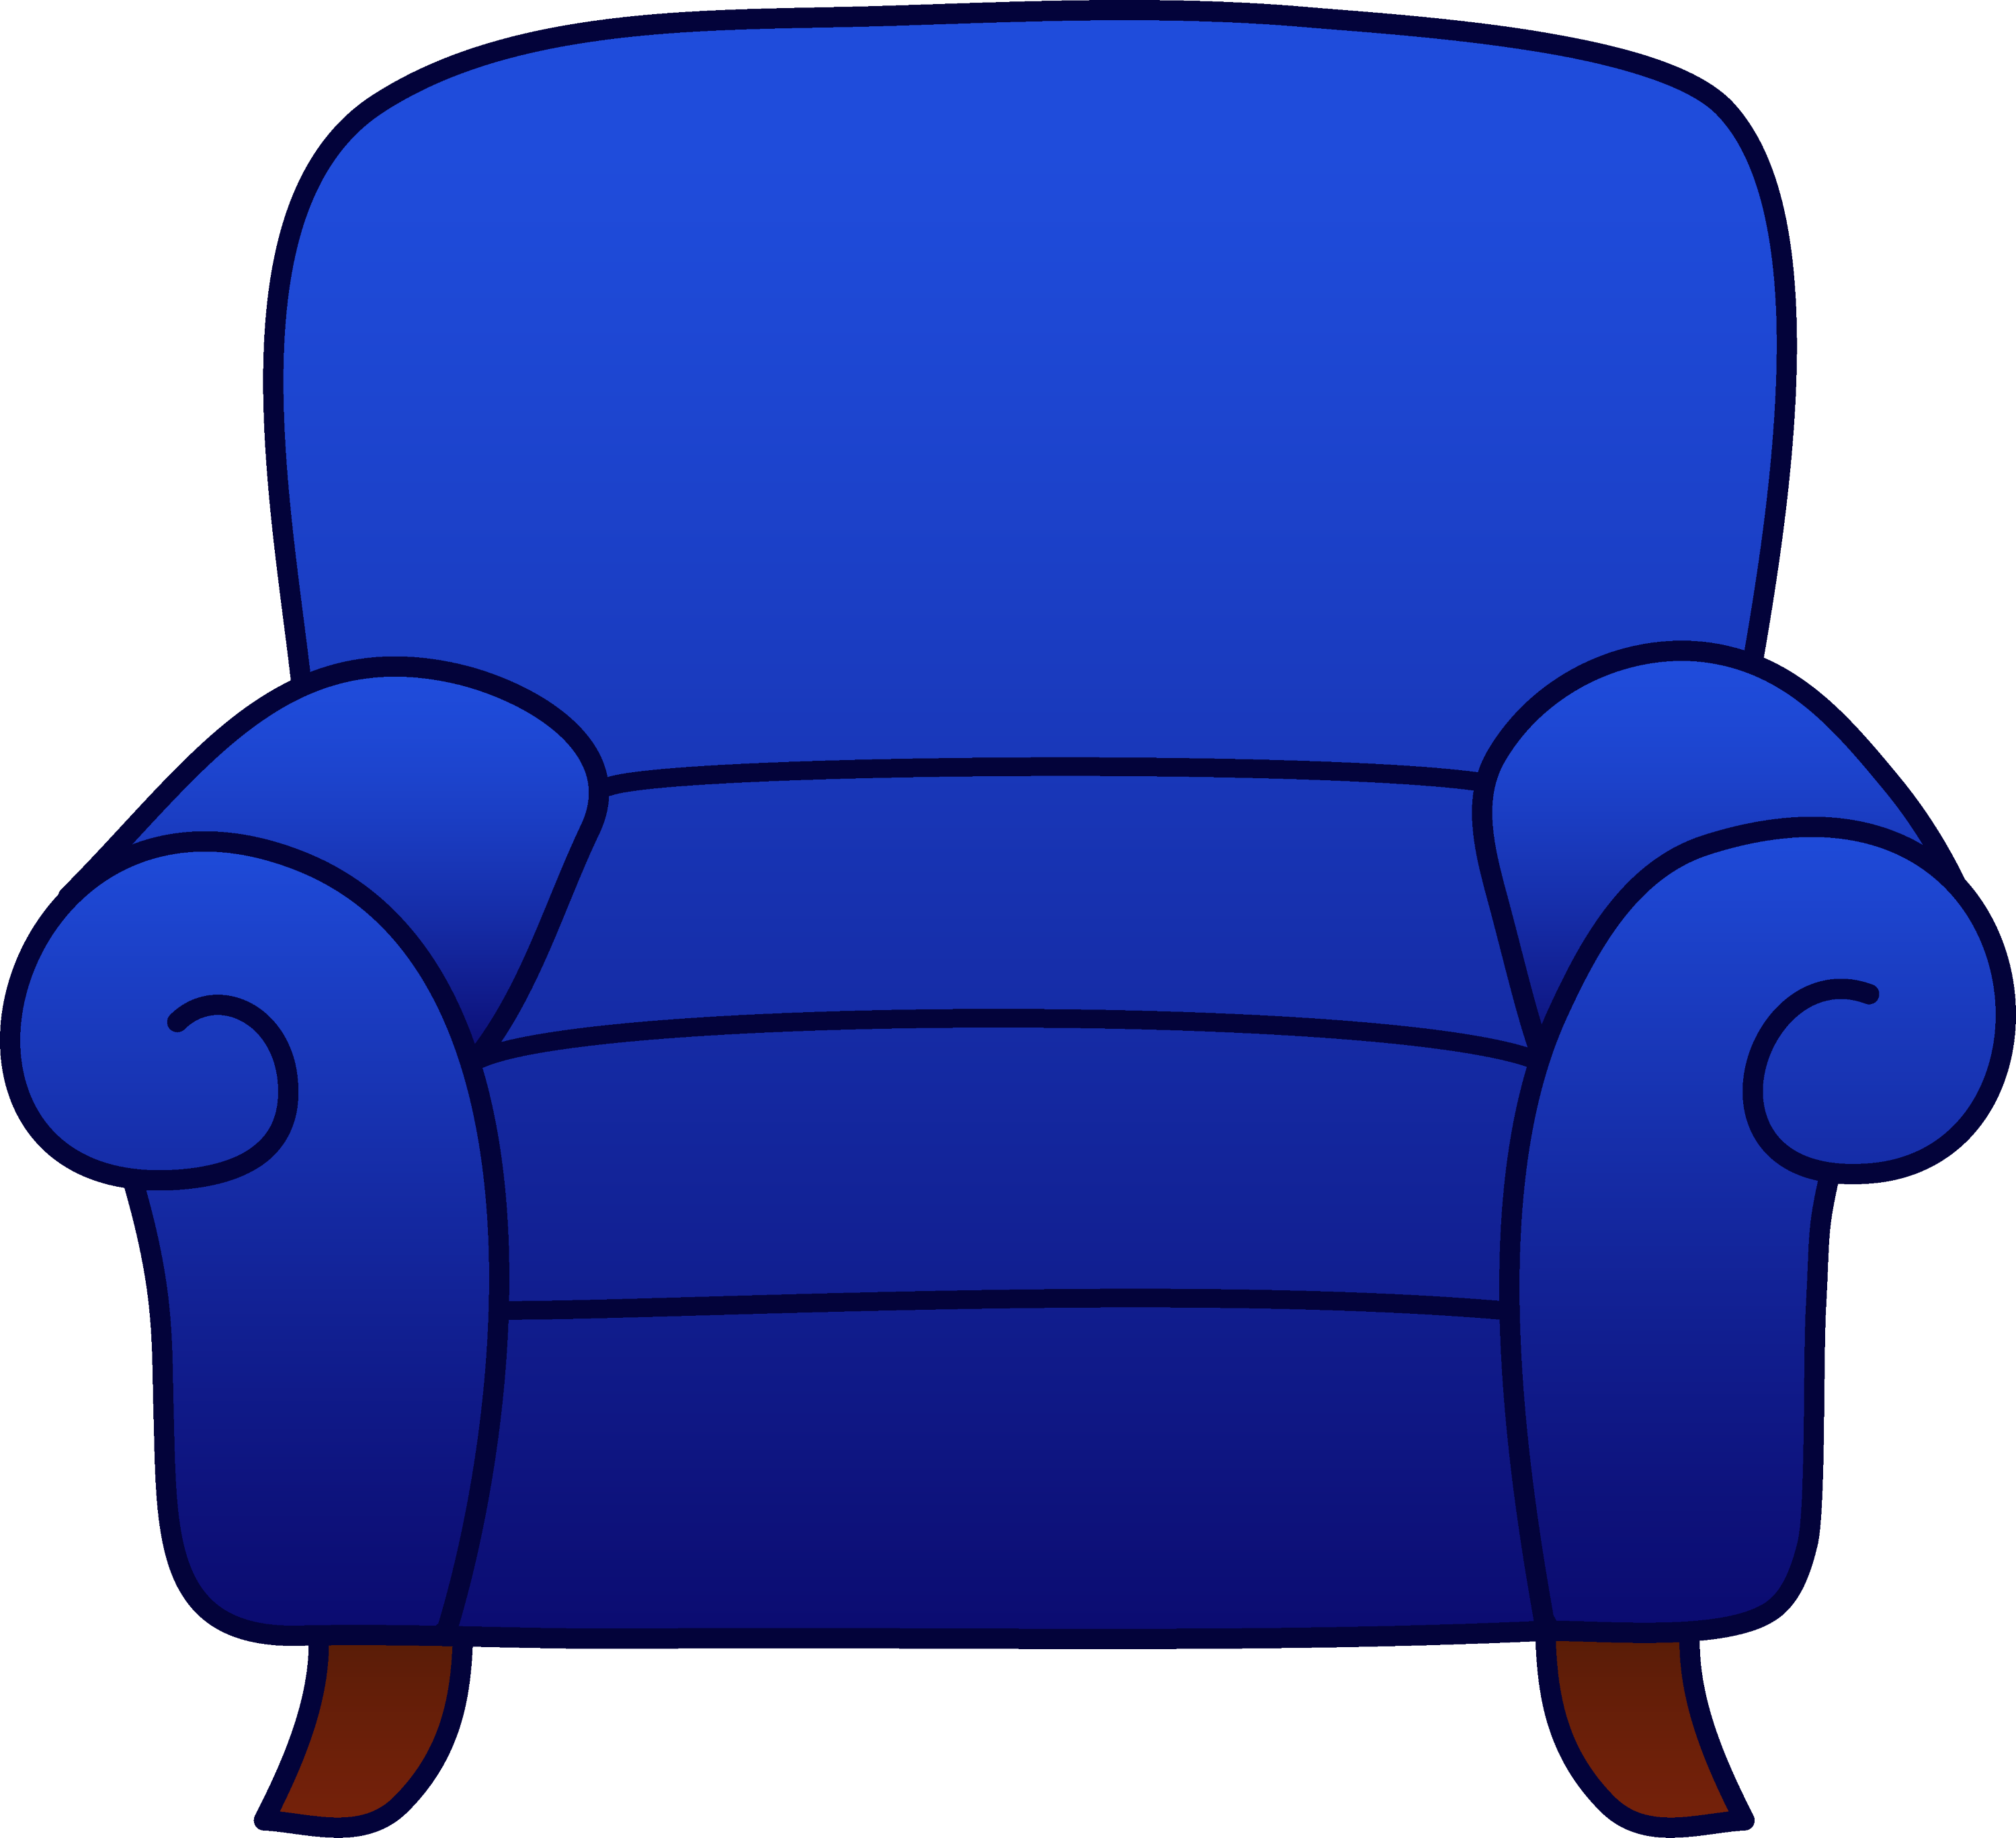 blue objects clipart - photo #17